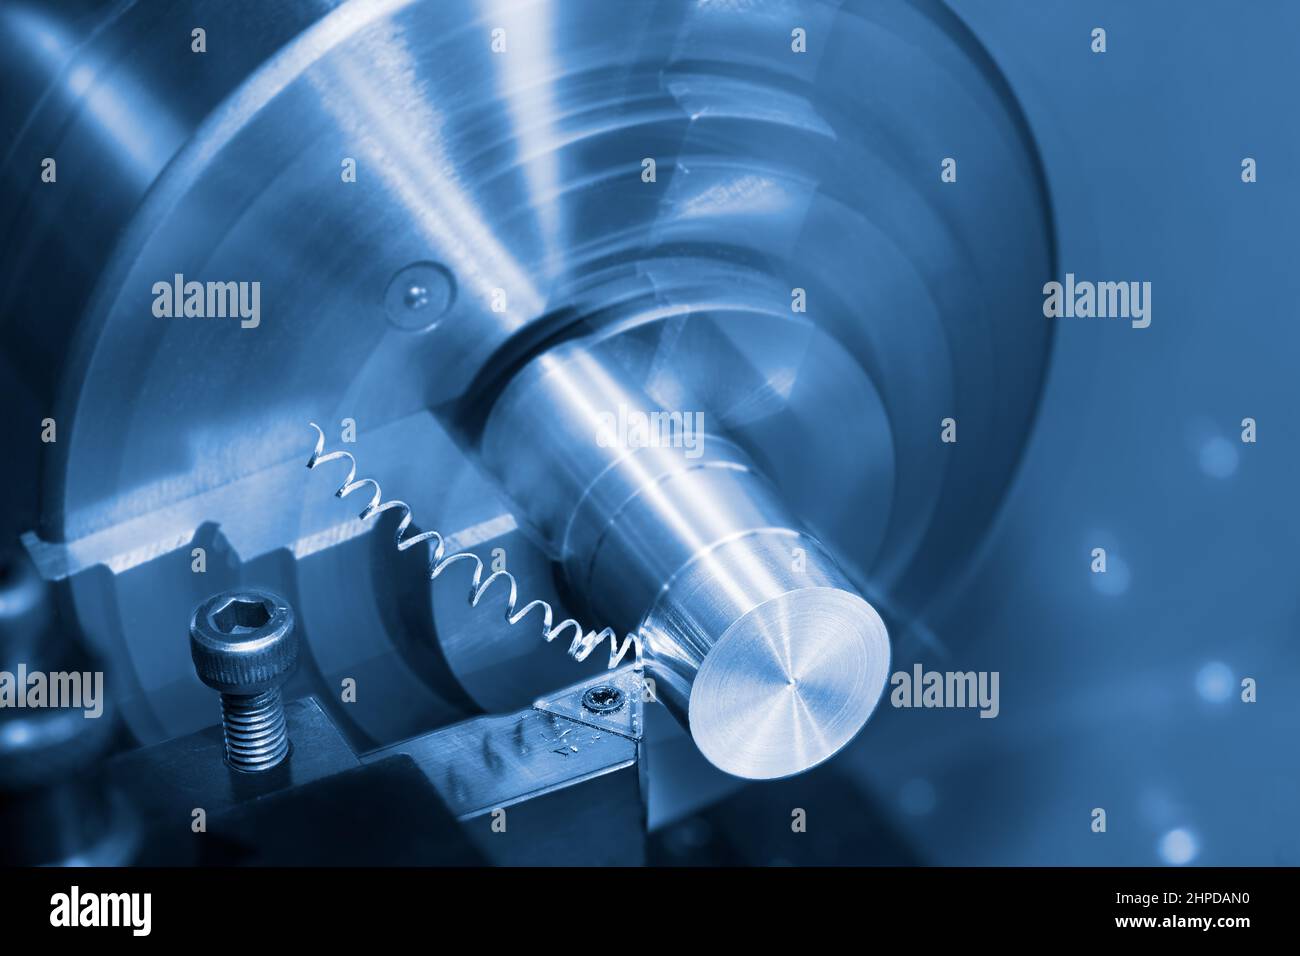 Lathe tool bit and spiral swarf at working on a metal product. Close-up of steel knife with carbide insert and turning machine. Blue toned background. Stock Photo